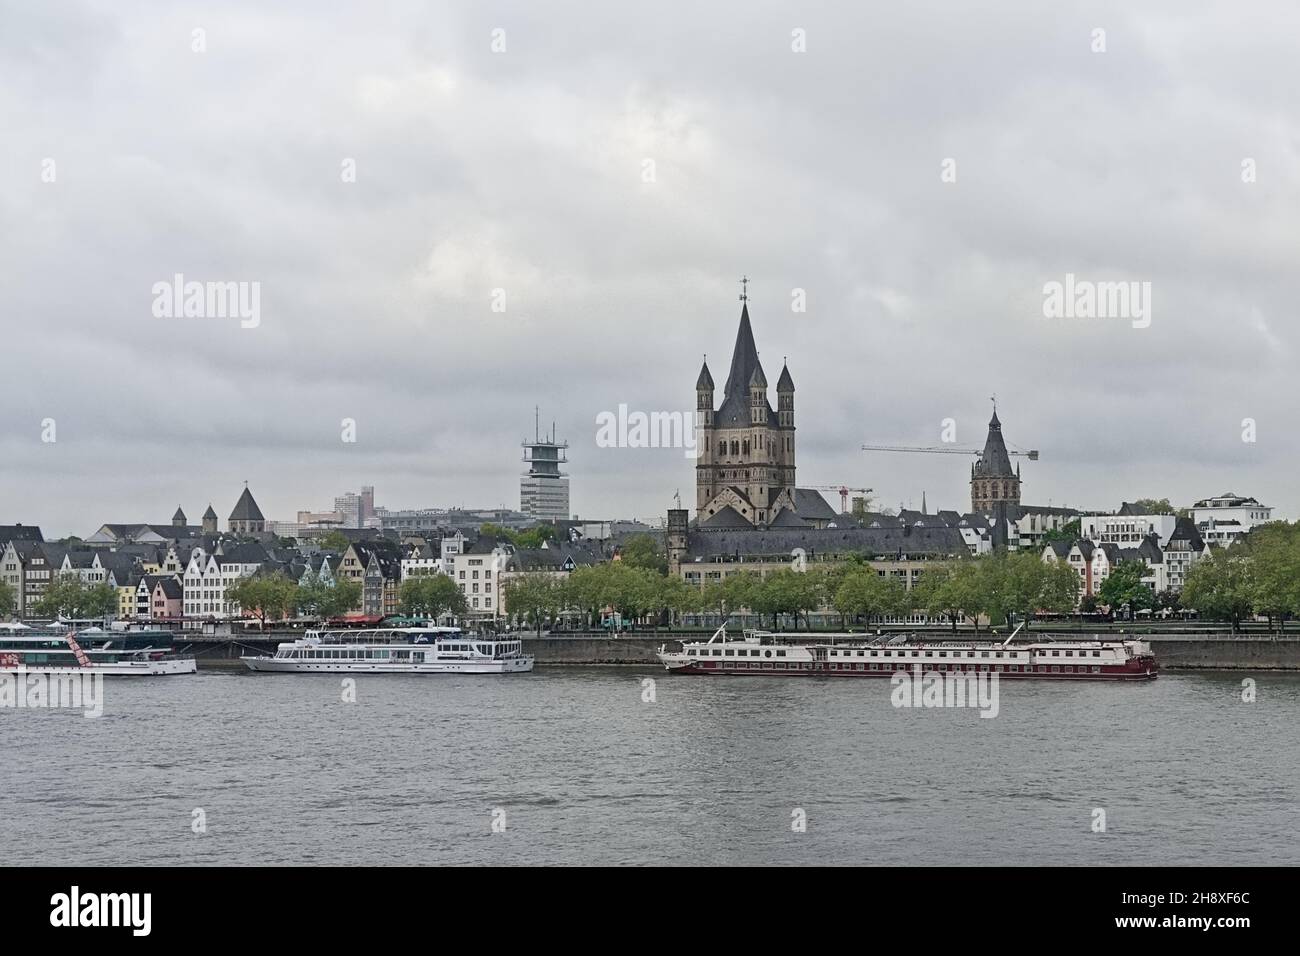 River rhine with tourist boats and traditional houses and Great Saint martin church in Cologne,Germany Stock Photo